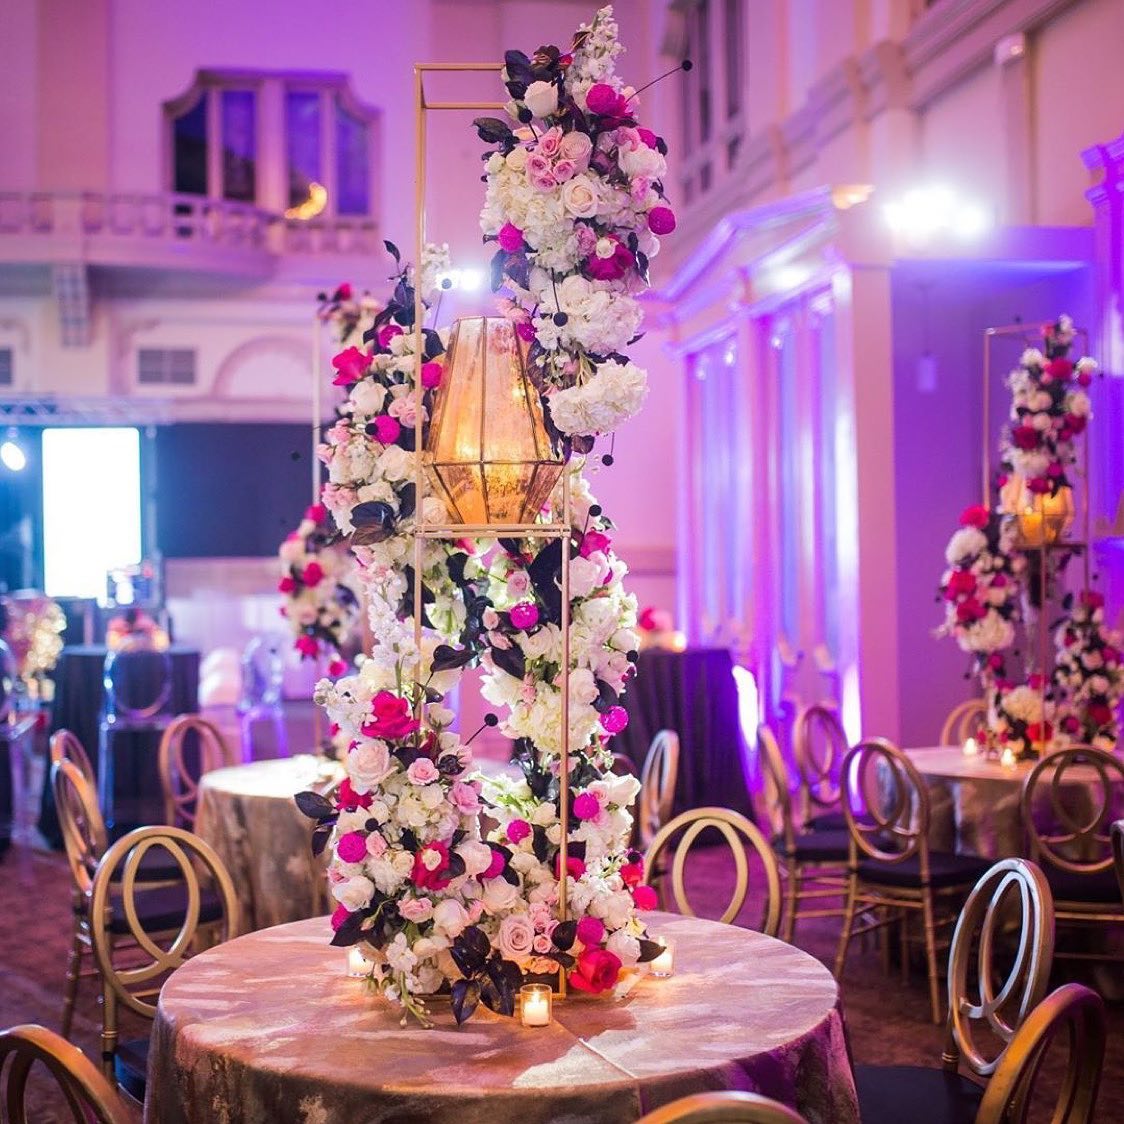 Pink and gold party decor. Photo: Mateo + Co.